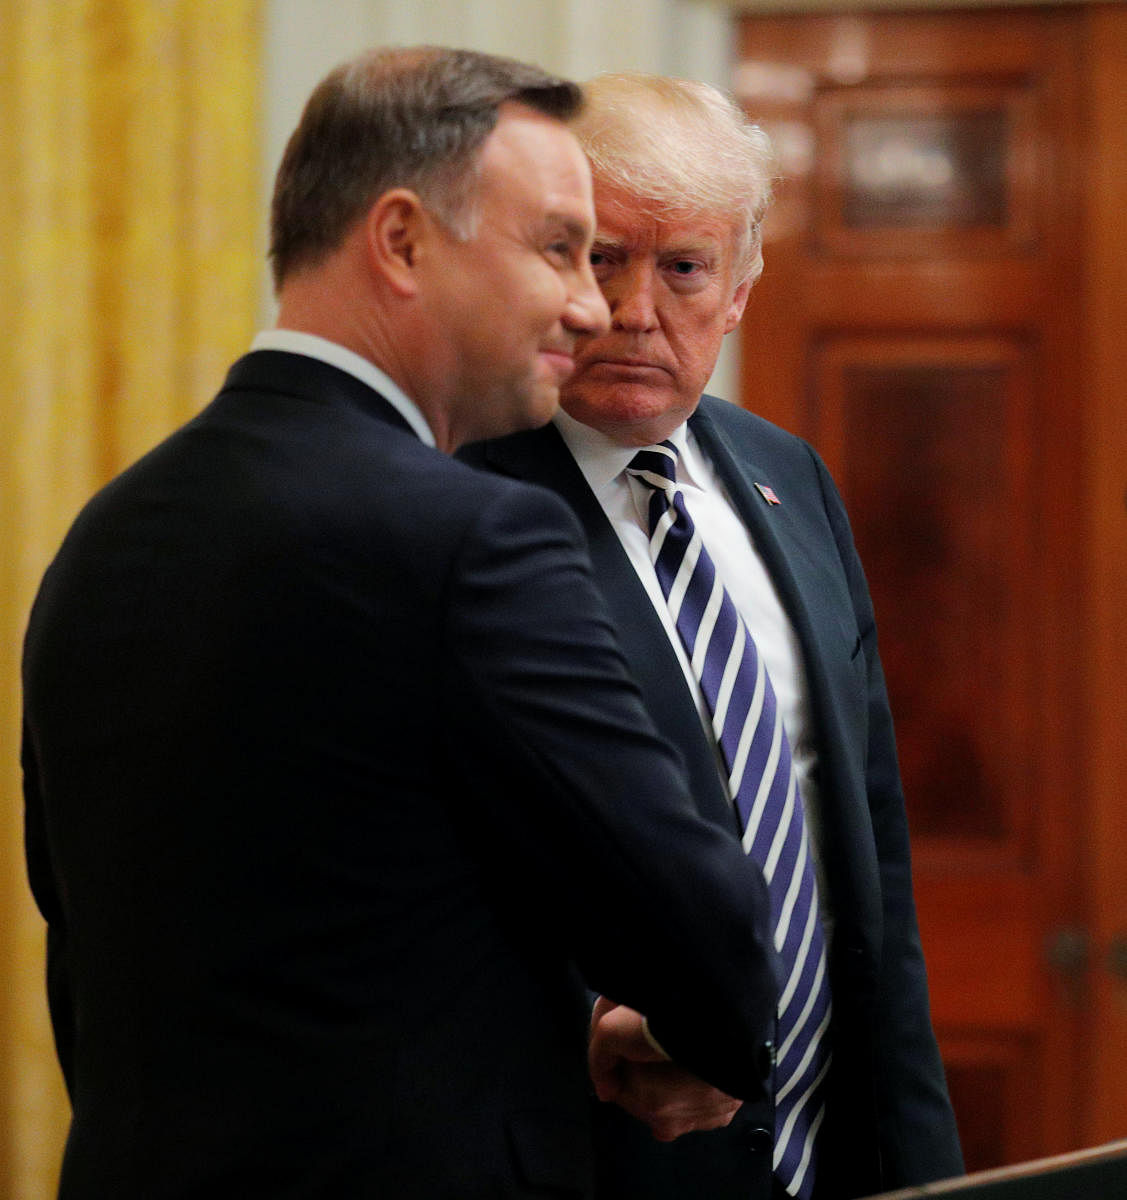 US President Donald Trump with Poland's President Andrzej Duda at the end of a joint news conference in the East Room of the White House in Washington on September 18, 2018. Reuters